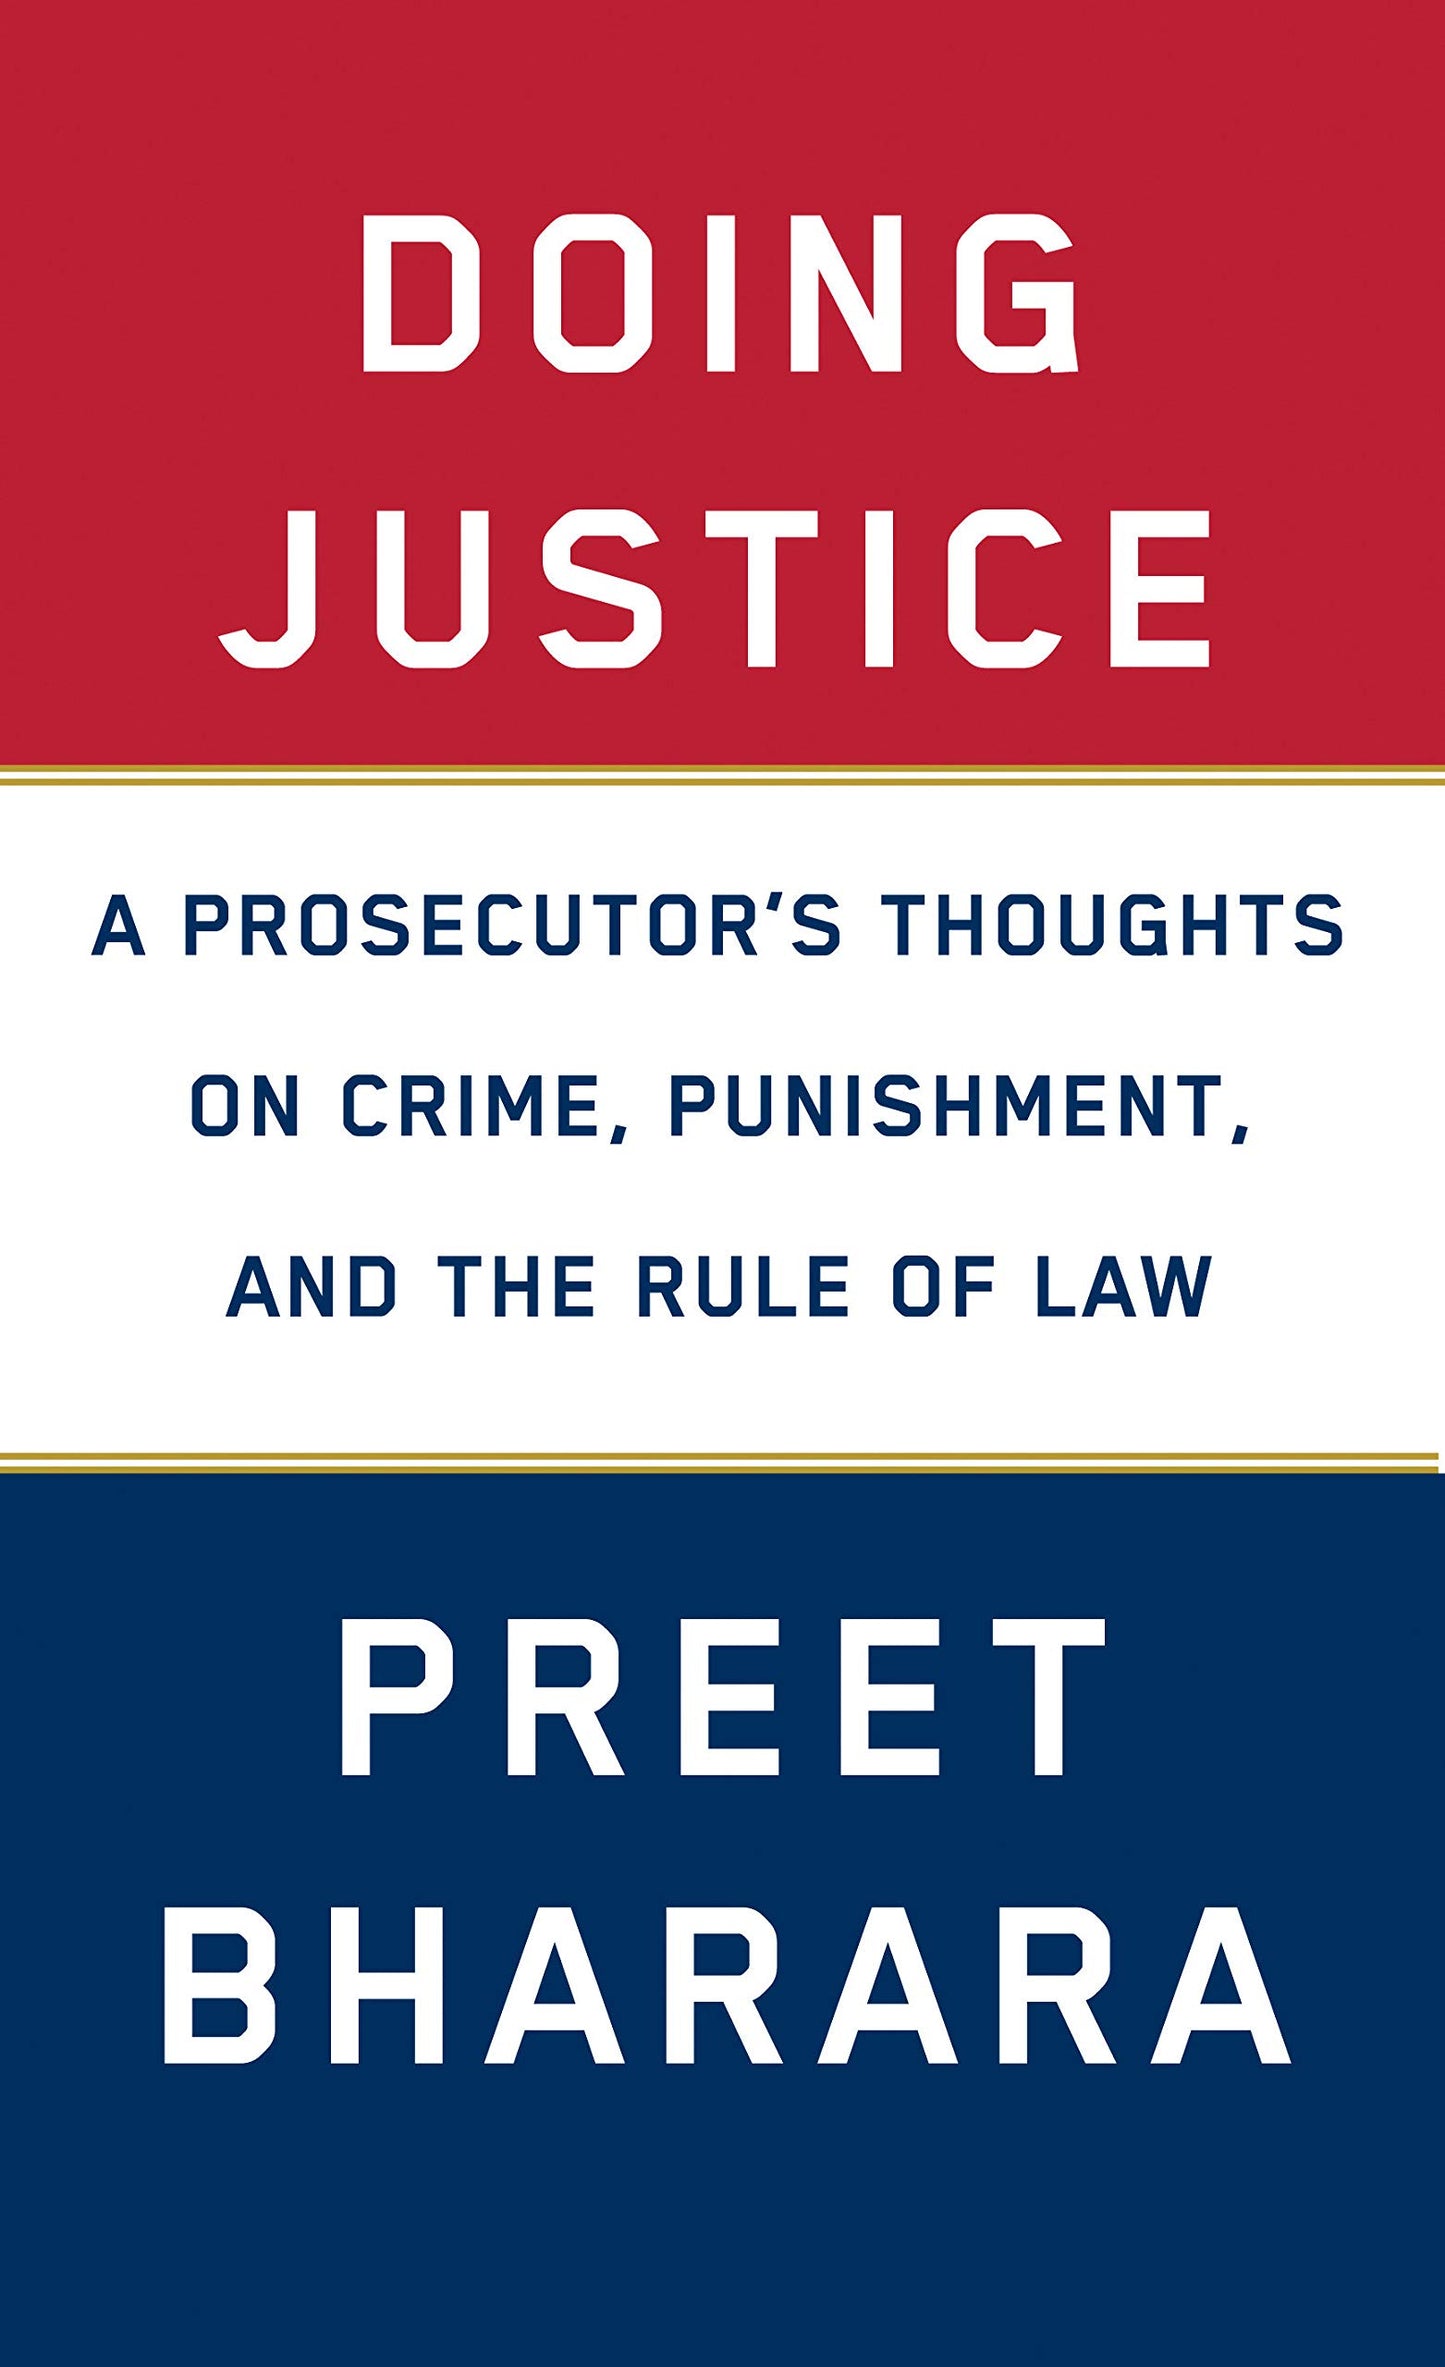 DOING JUSTICE: A PROSECUTOR'S THOUGHTS... - Virginia Book Company